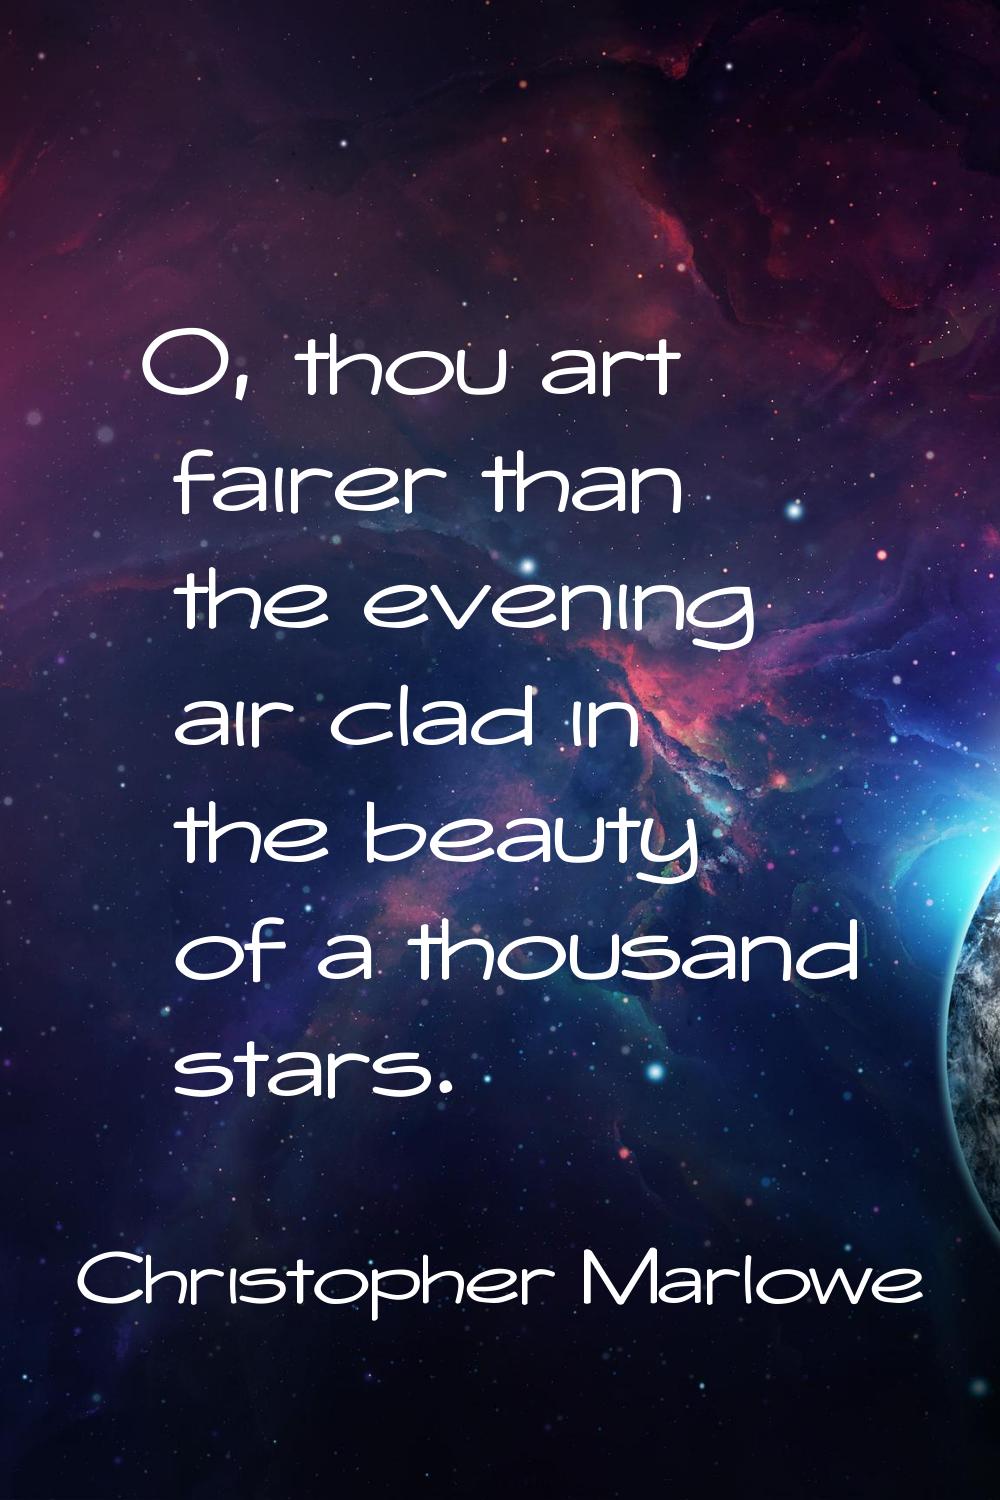 O, thou art fairer than the evening air clad in the beauty of a thousand stars.